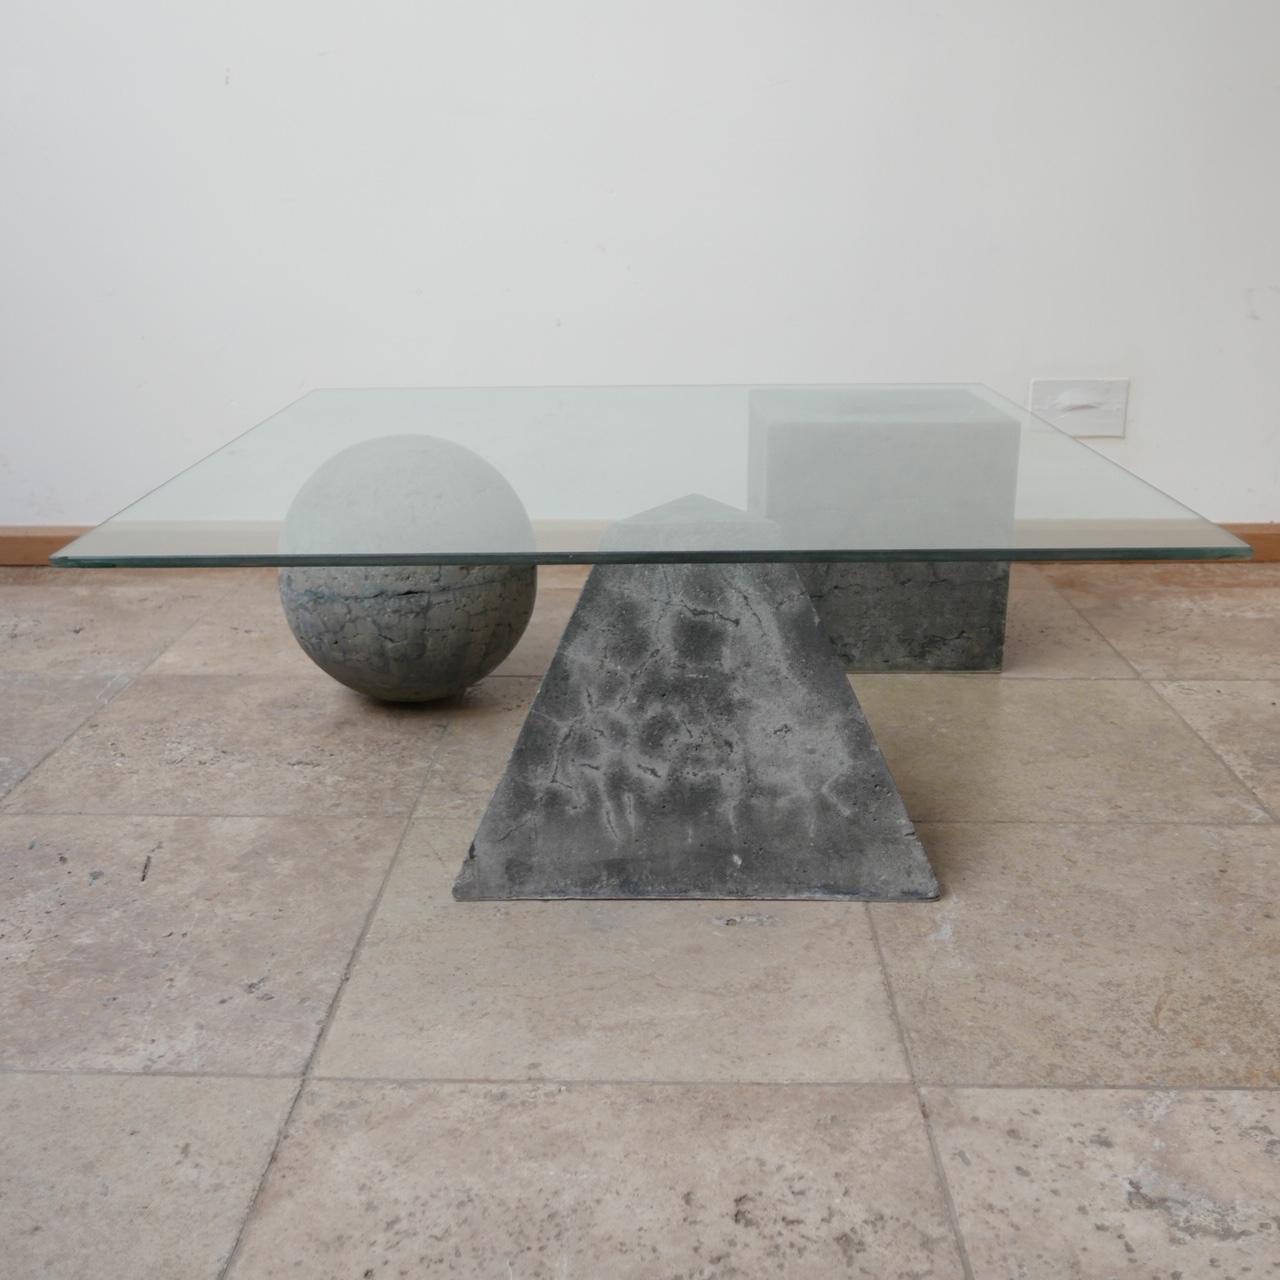 A mid to late 20th century coffee table in the style of Massimo and Lella Vignelli. 

Italy, c1980s. 

The geometric forms are made of a concrete or similar composite some have nicks and wear commensurate with age. 

The glass top has some